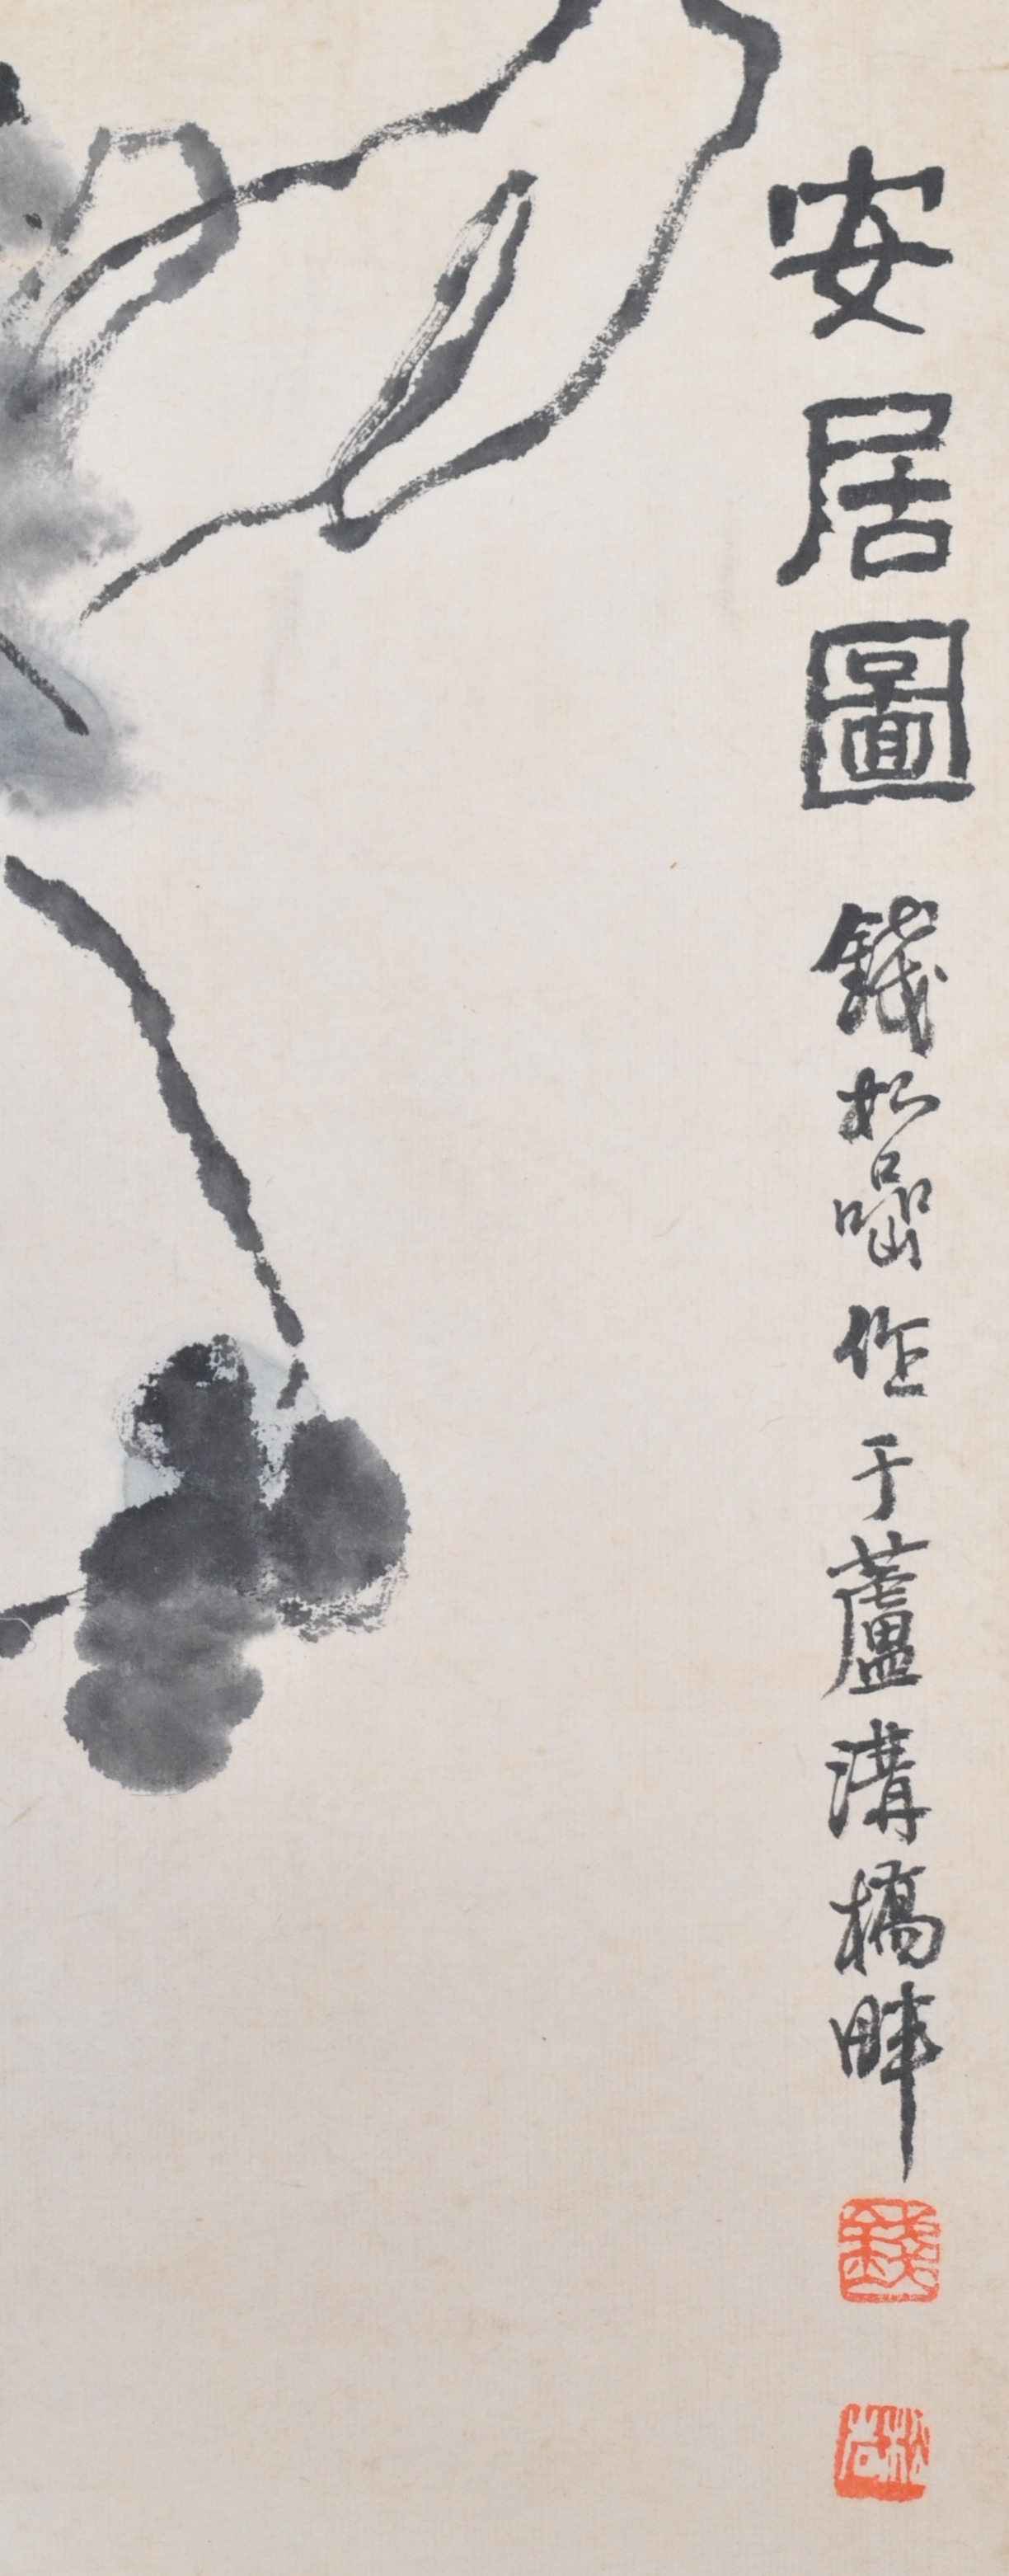 QIAN SONGYAN (1898-1985) - A MOMENT OF PEACEFUL LIFE CHINESE SCROLL - Image 5 of 5